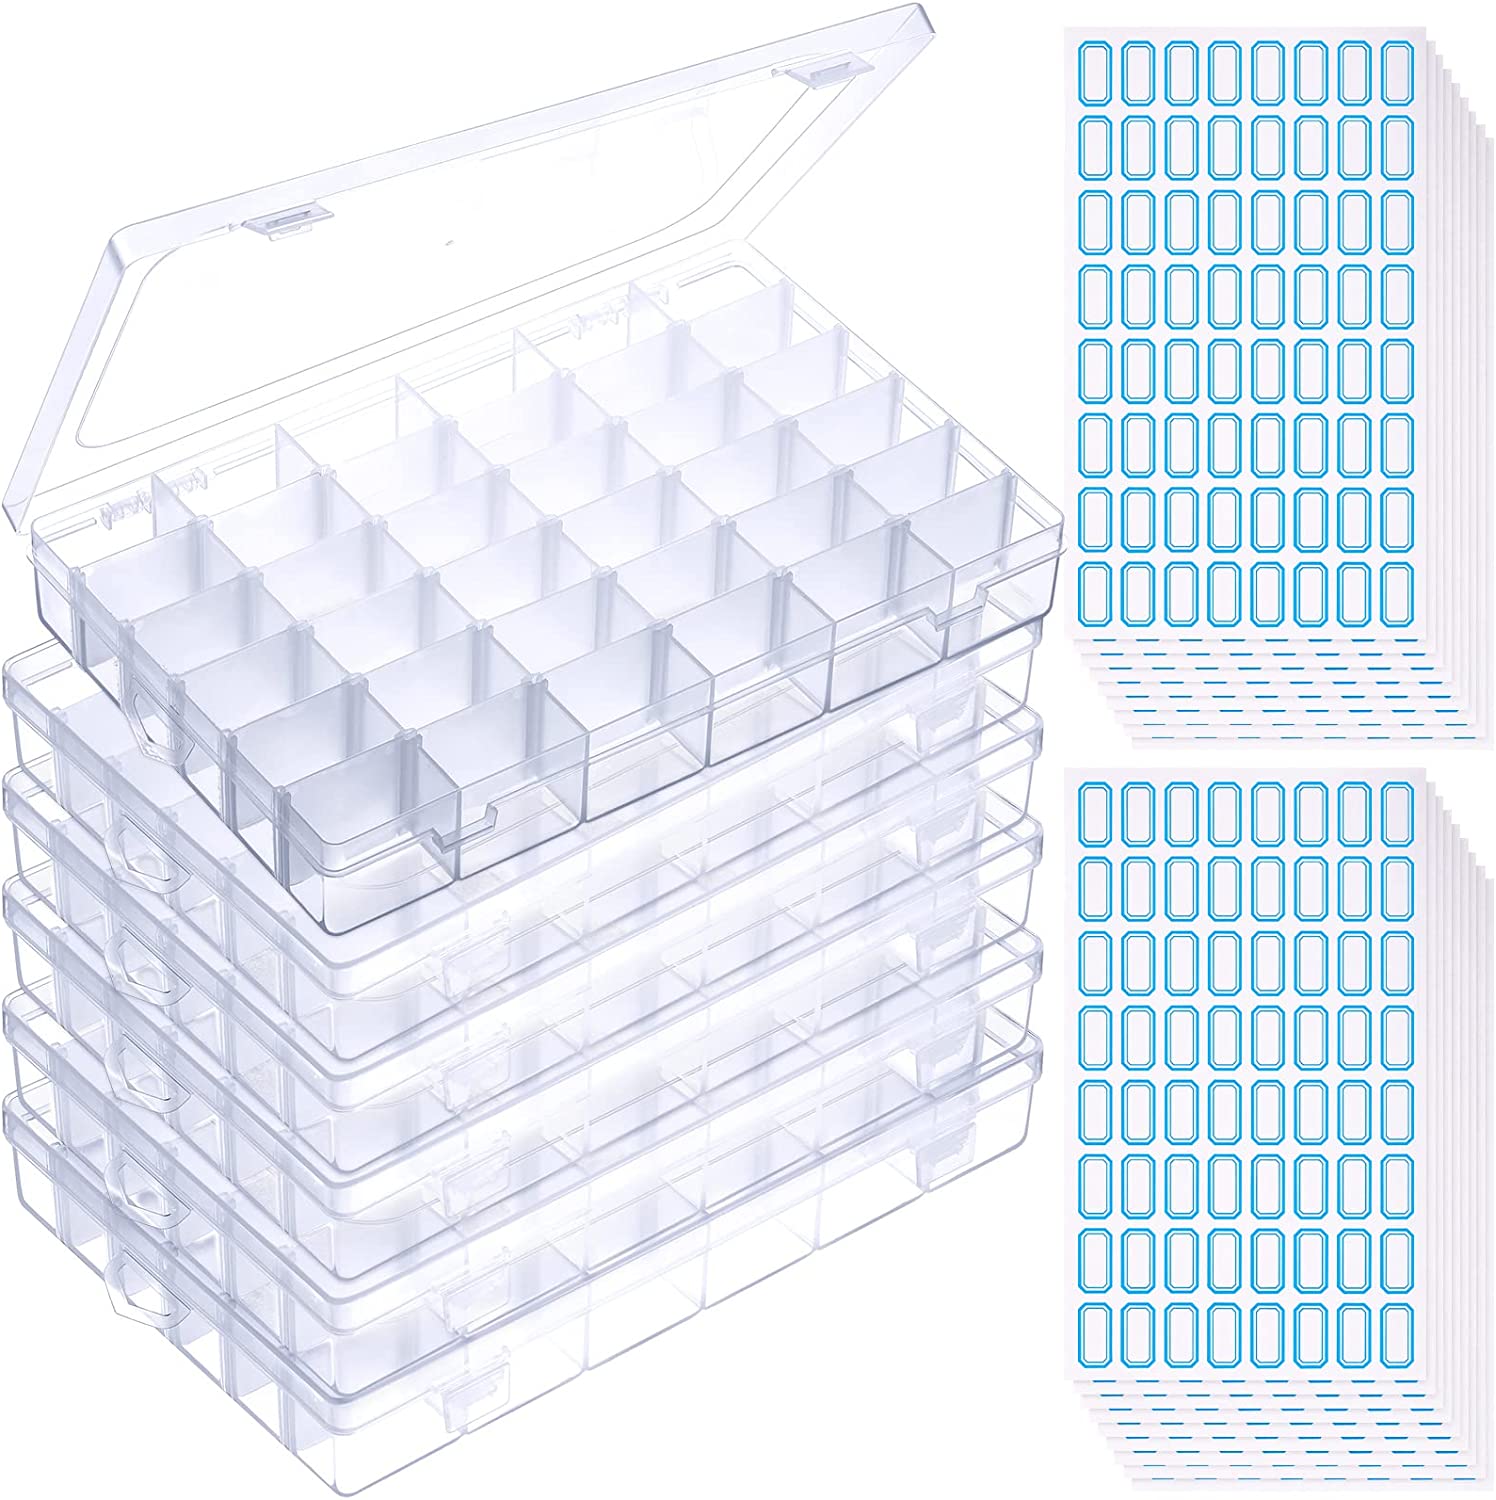 Snowkingdom Plastic Grid Box Storage Organizer Case for Display Collection with Adjustable Dividers - 3 Pack (1pc 36 Grids + 2pc 15 Grids) - Free